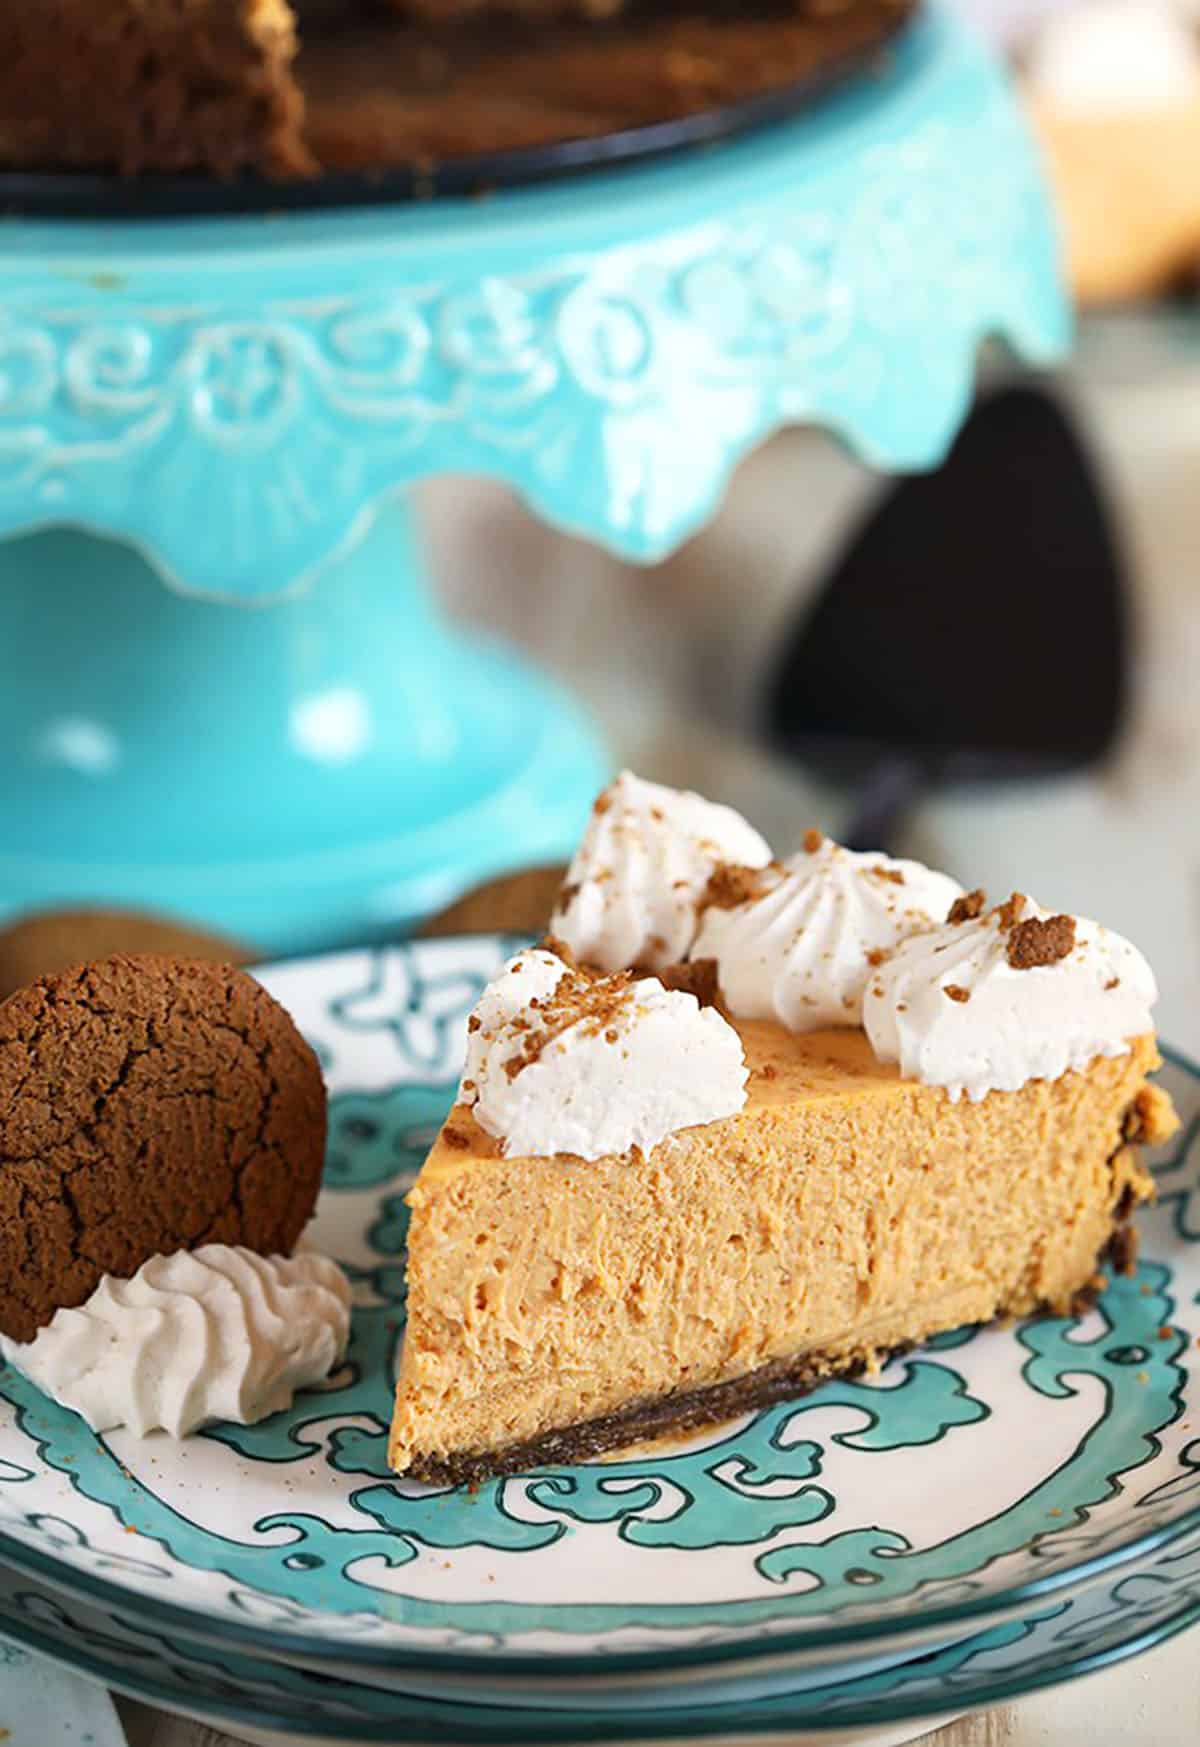 Pumpkin Cheesecake slice on a decorative plate with a gingersnap cookie on the side.